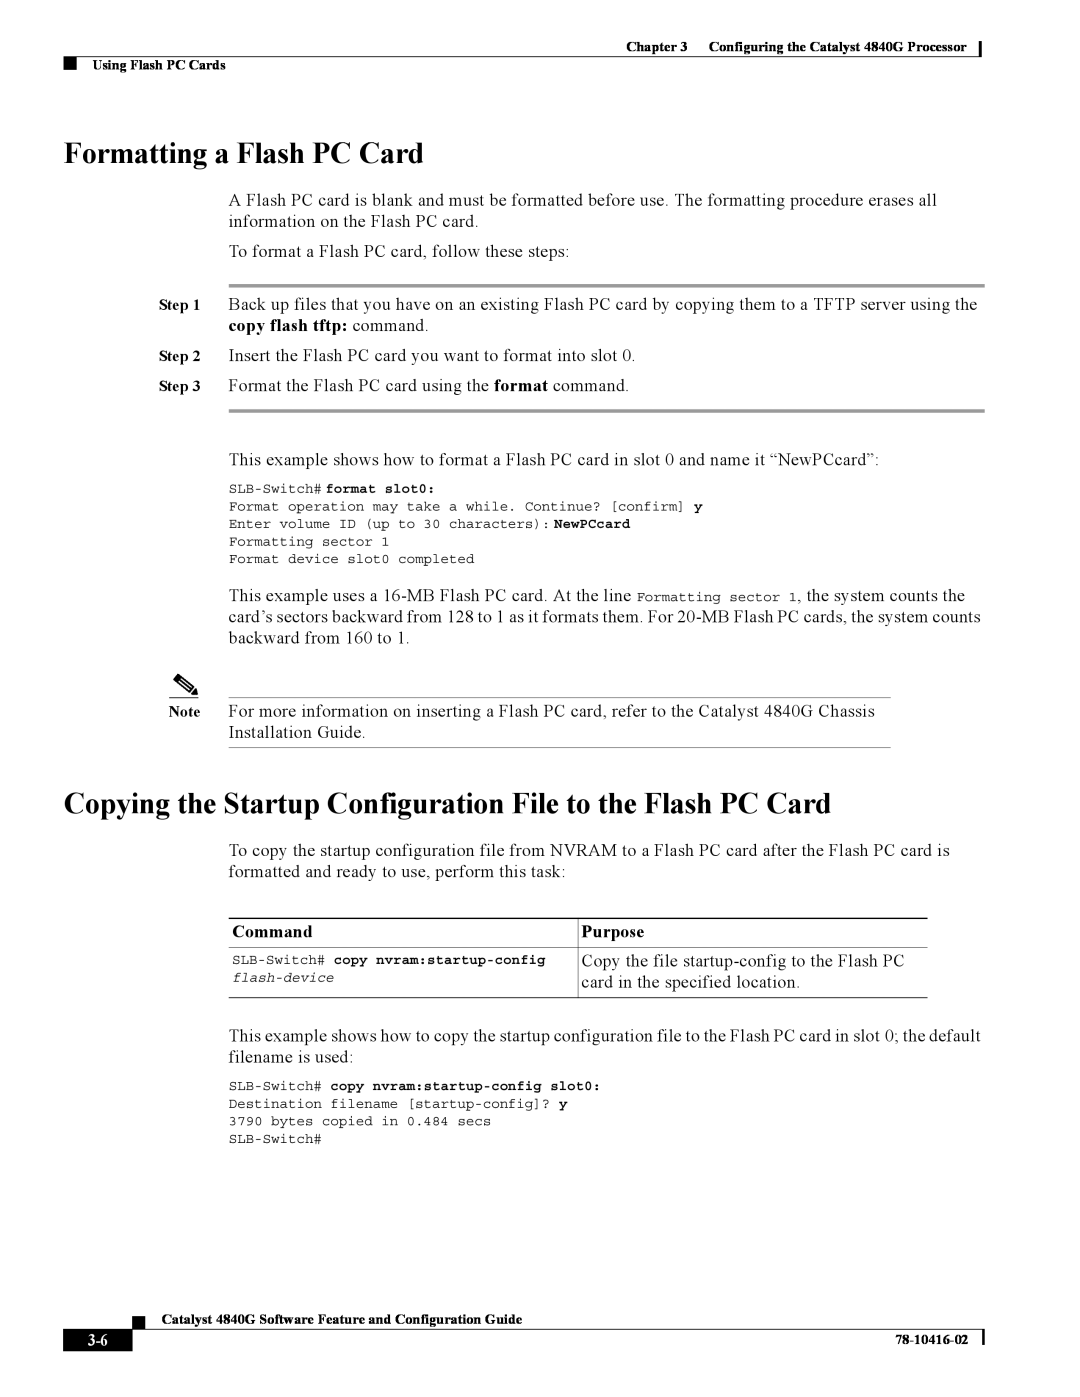 Cisco Systems 4840G appendix Formatting a Flash PC Card, Copying the Startup Configuration File to the Flash PC Card 